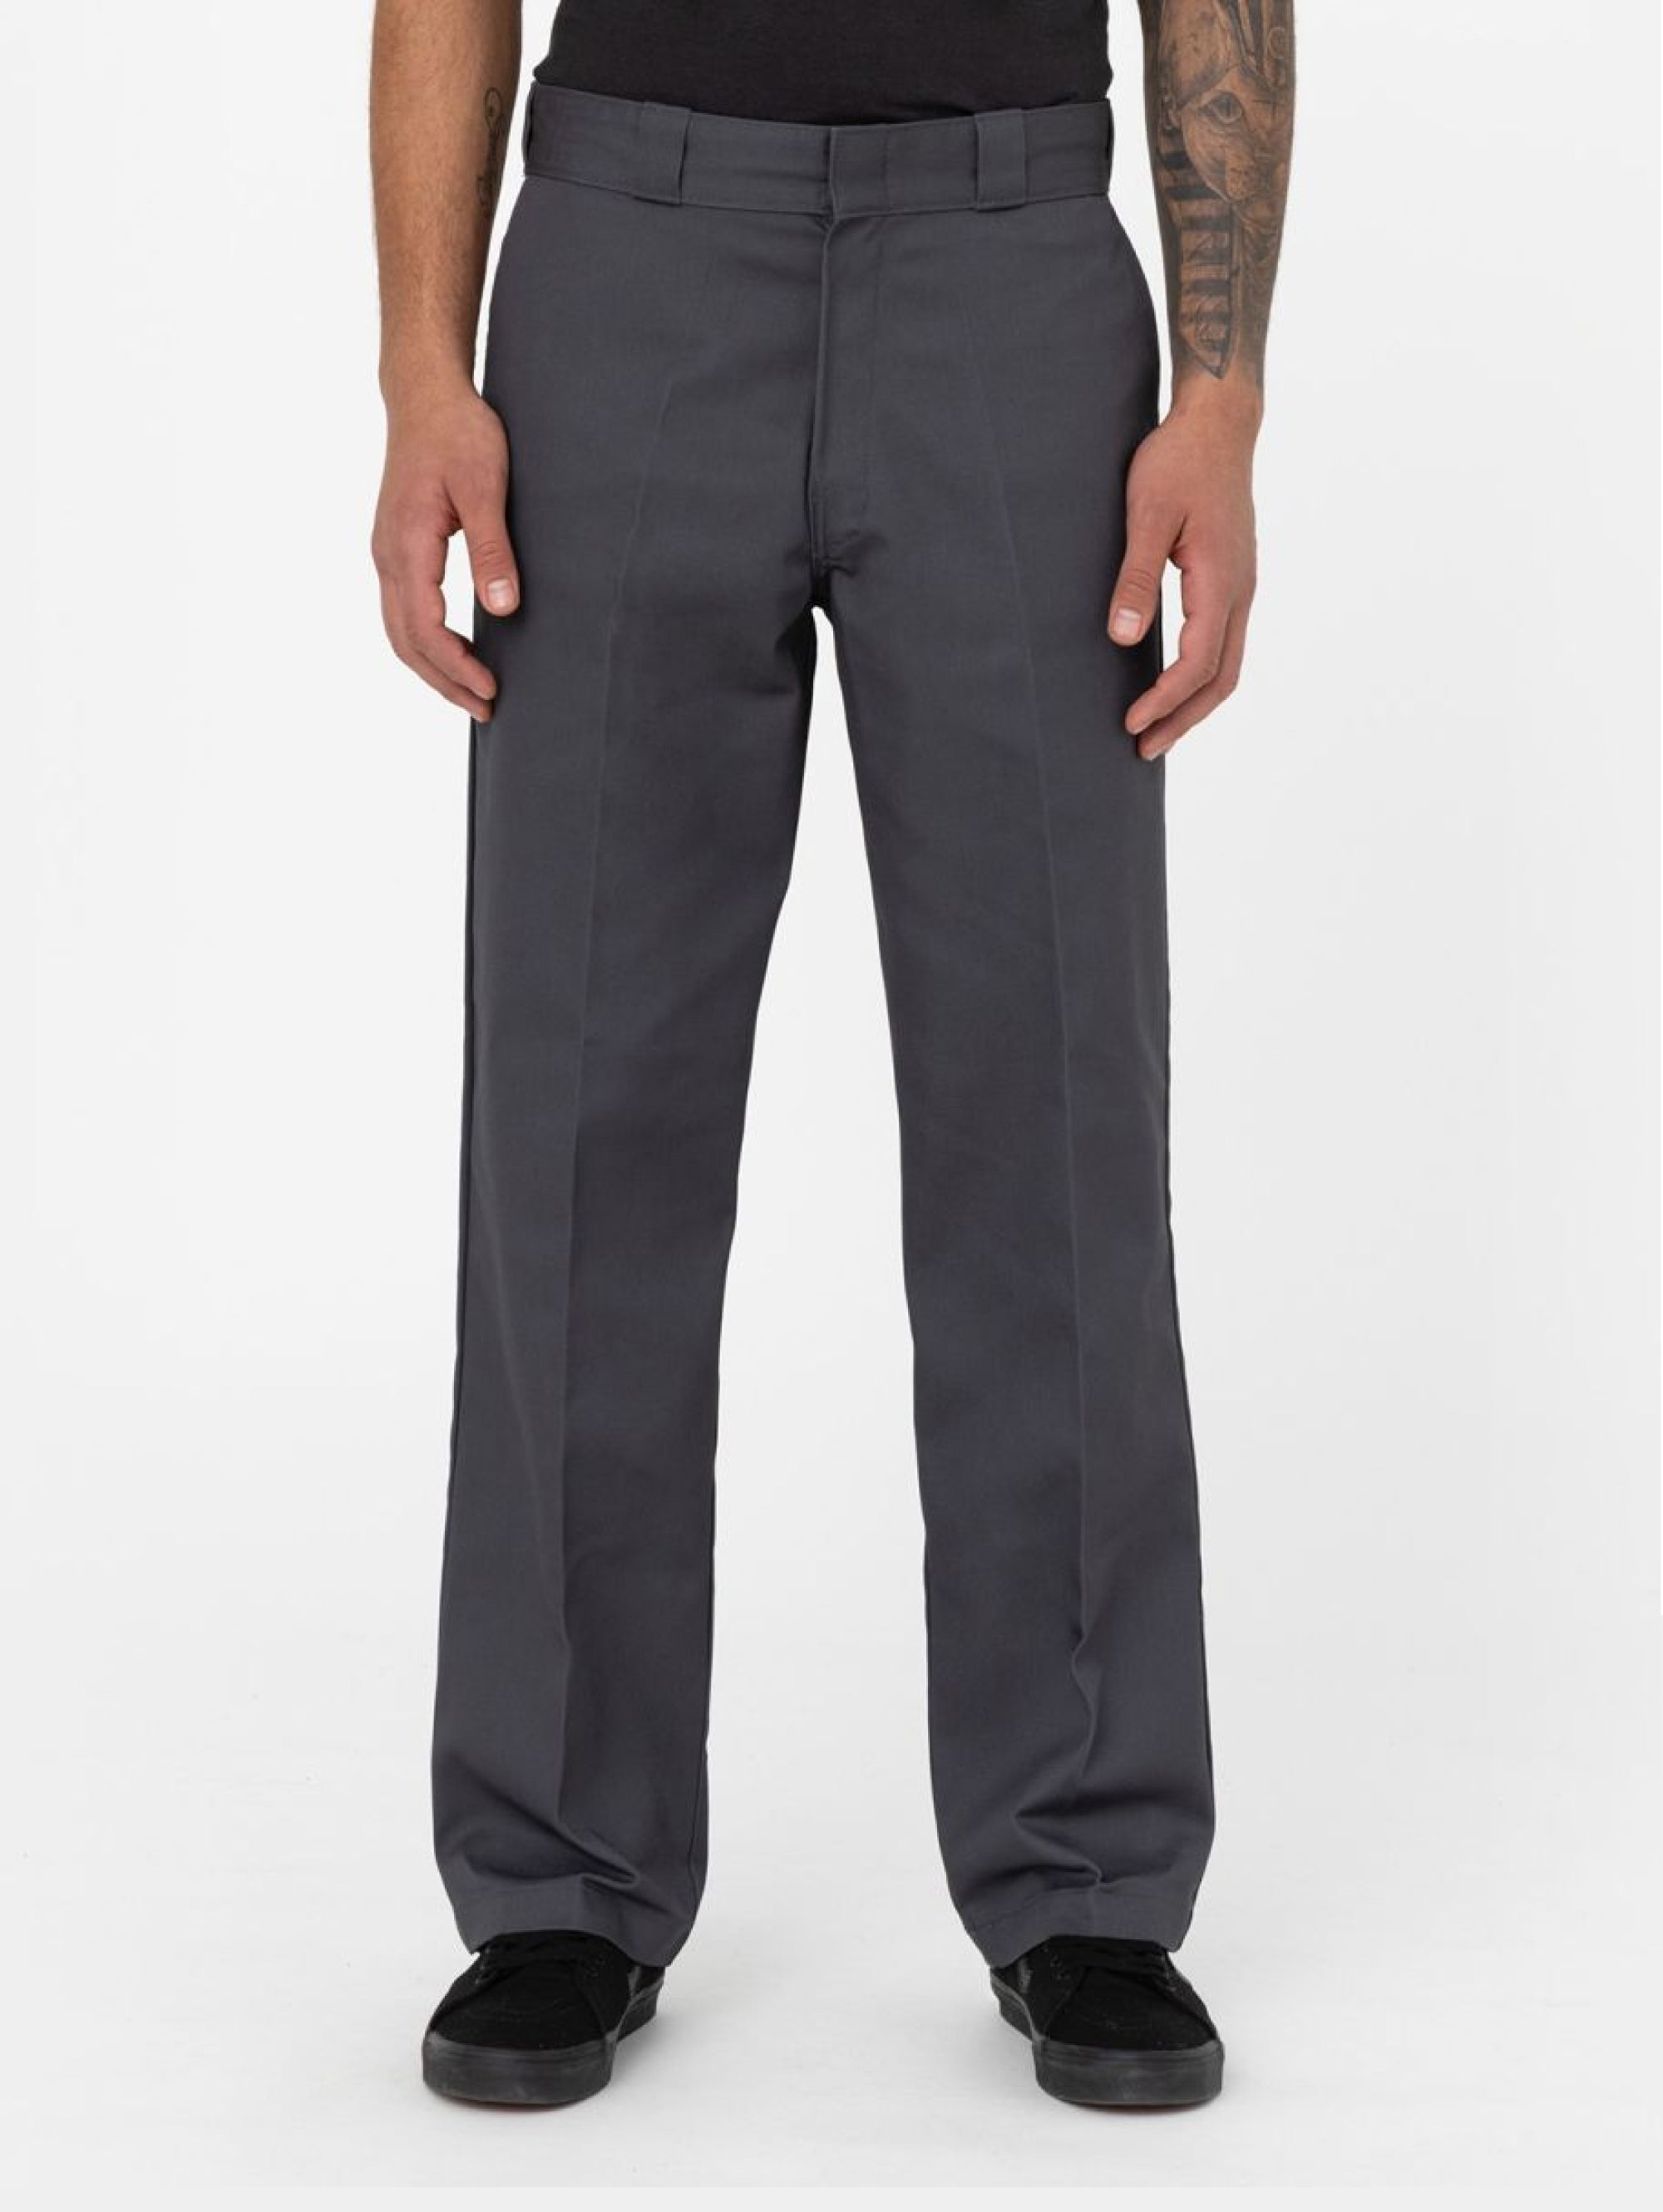 Straight Leg Trousers 874 Anthracite Grey